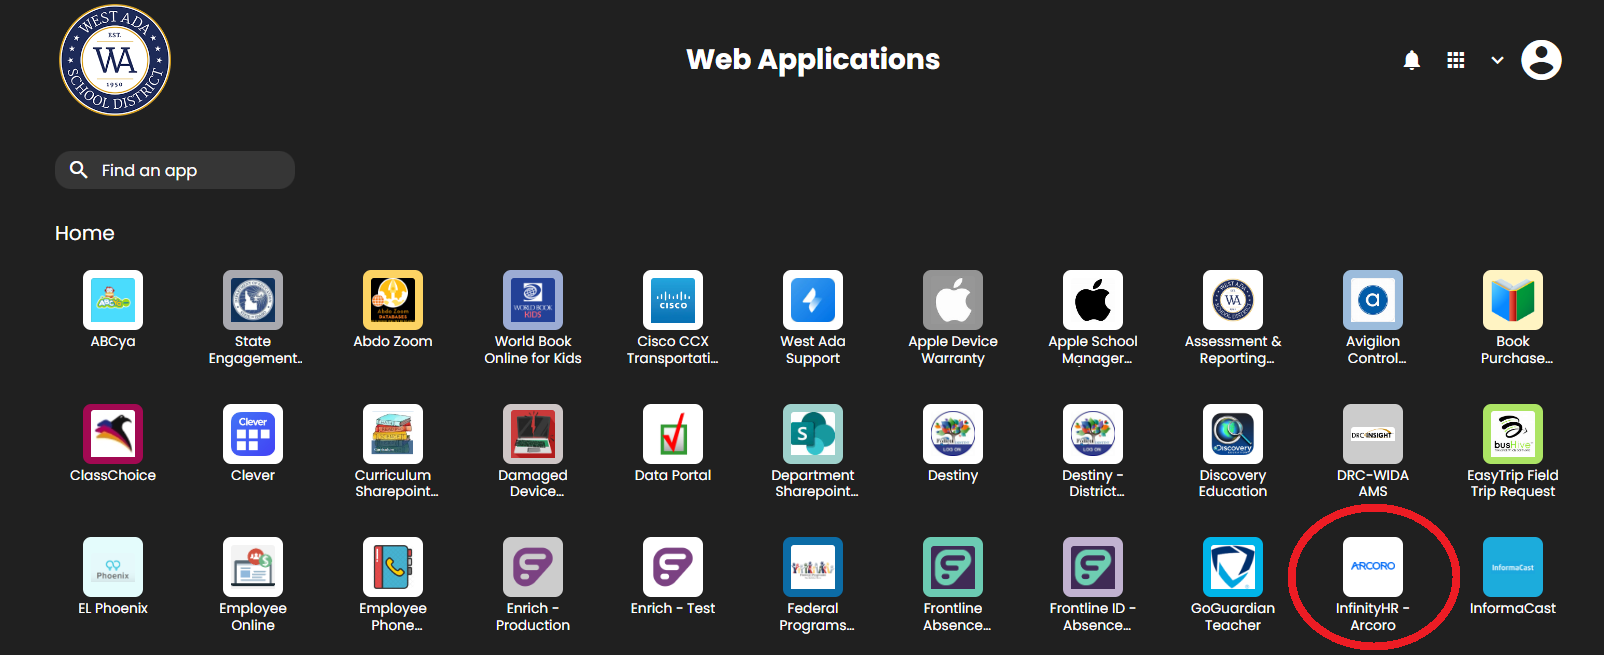 screen capture of the West Ada Web Apps portal, displaying several different apps. The ARCORO button is circled in red on the bottom right corner